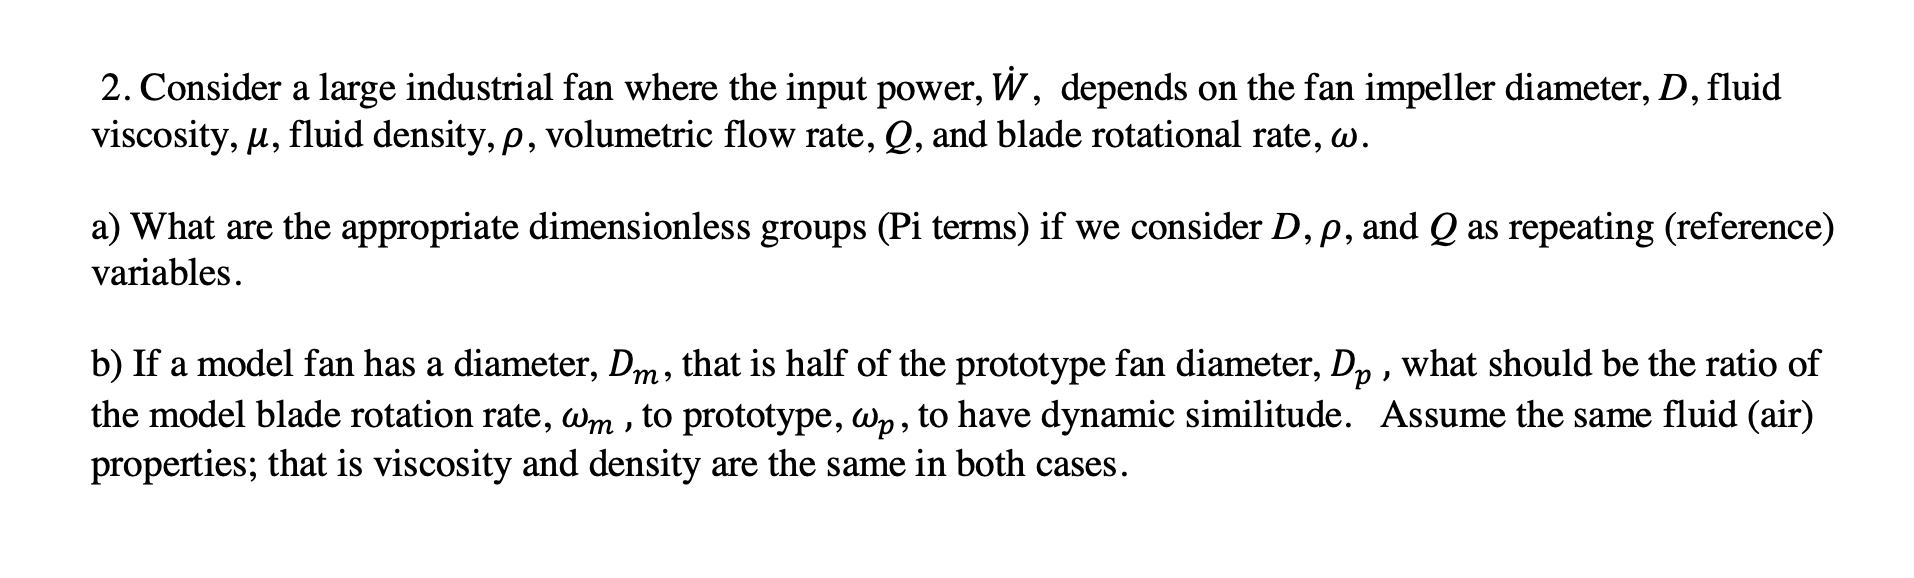 2. Consider a large industrial fan where the input power, W, depends on the fan impeller diameter, D, fluid
viscosity, u, fluid density, p, volumetric flow rate, Q, and blade rotational rate, w.
a) What are the appropriate dimensionless groups (Pi terms) if we consider D, p, and Q as repeating (reference)
variables.
b) If a model fan has a diameter, Dm, that is half of the prototype fan diameter, D, , what should be the ratio of
the model blade rotation rate, Wm , to prototype, wp, to have dynamic similitude. Assume the same fluid (air)
properties; that is viscosity and density are the same in both cases.
